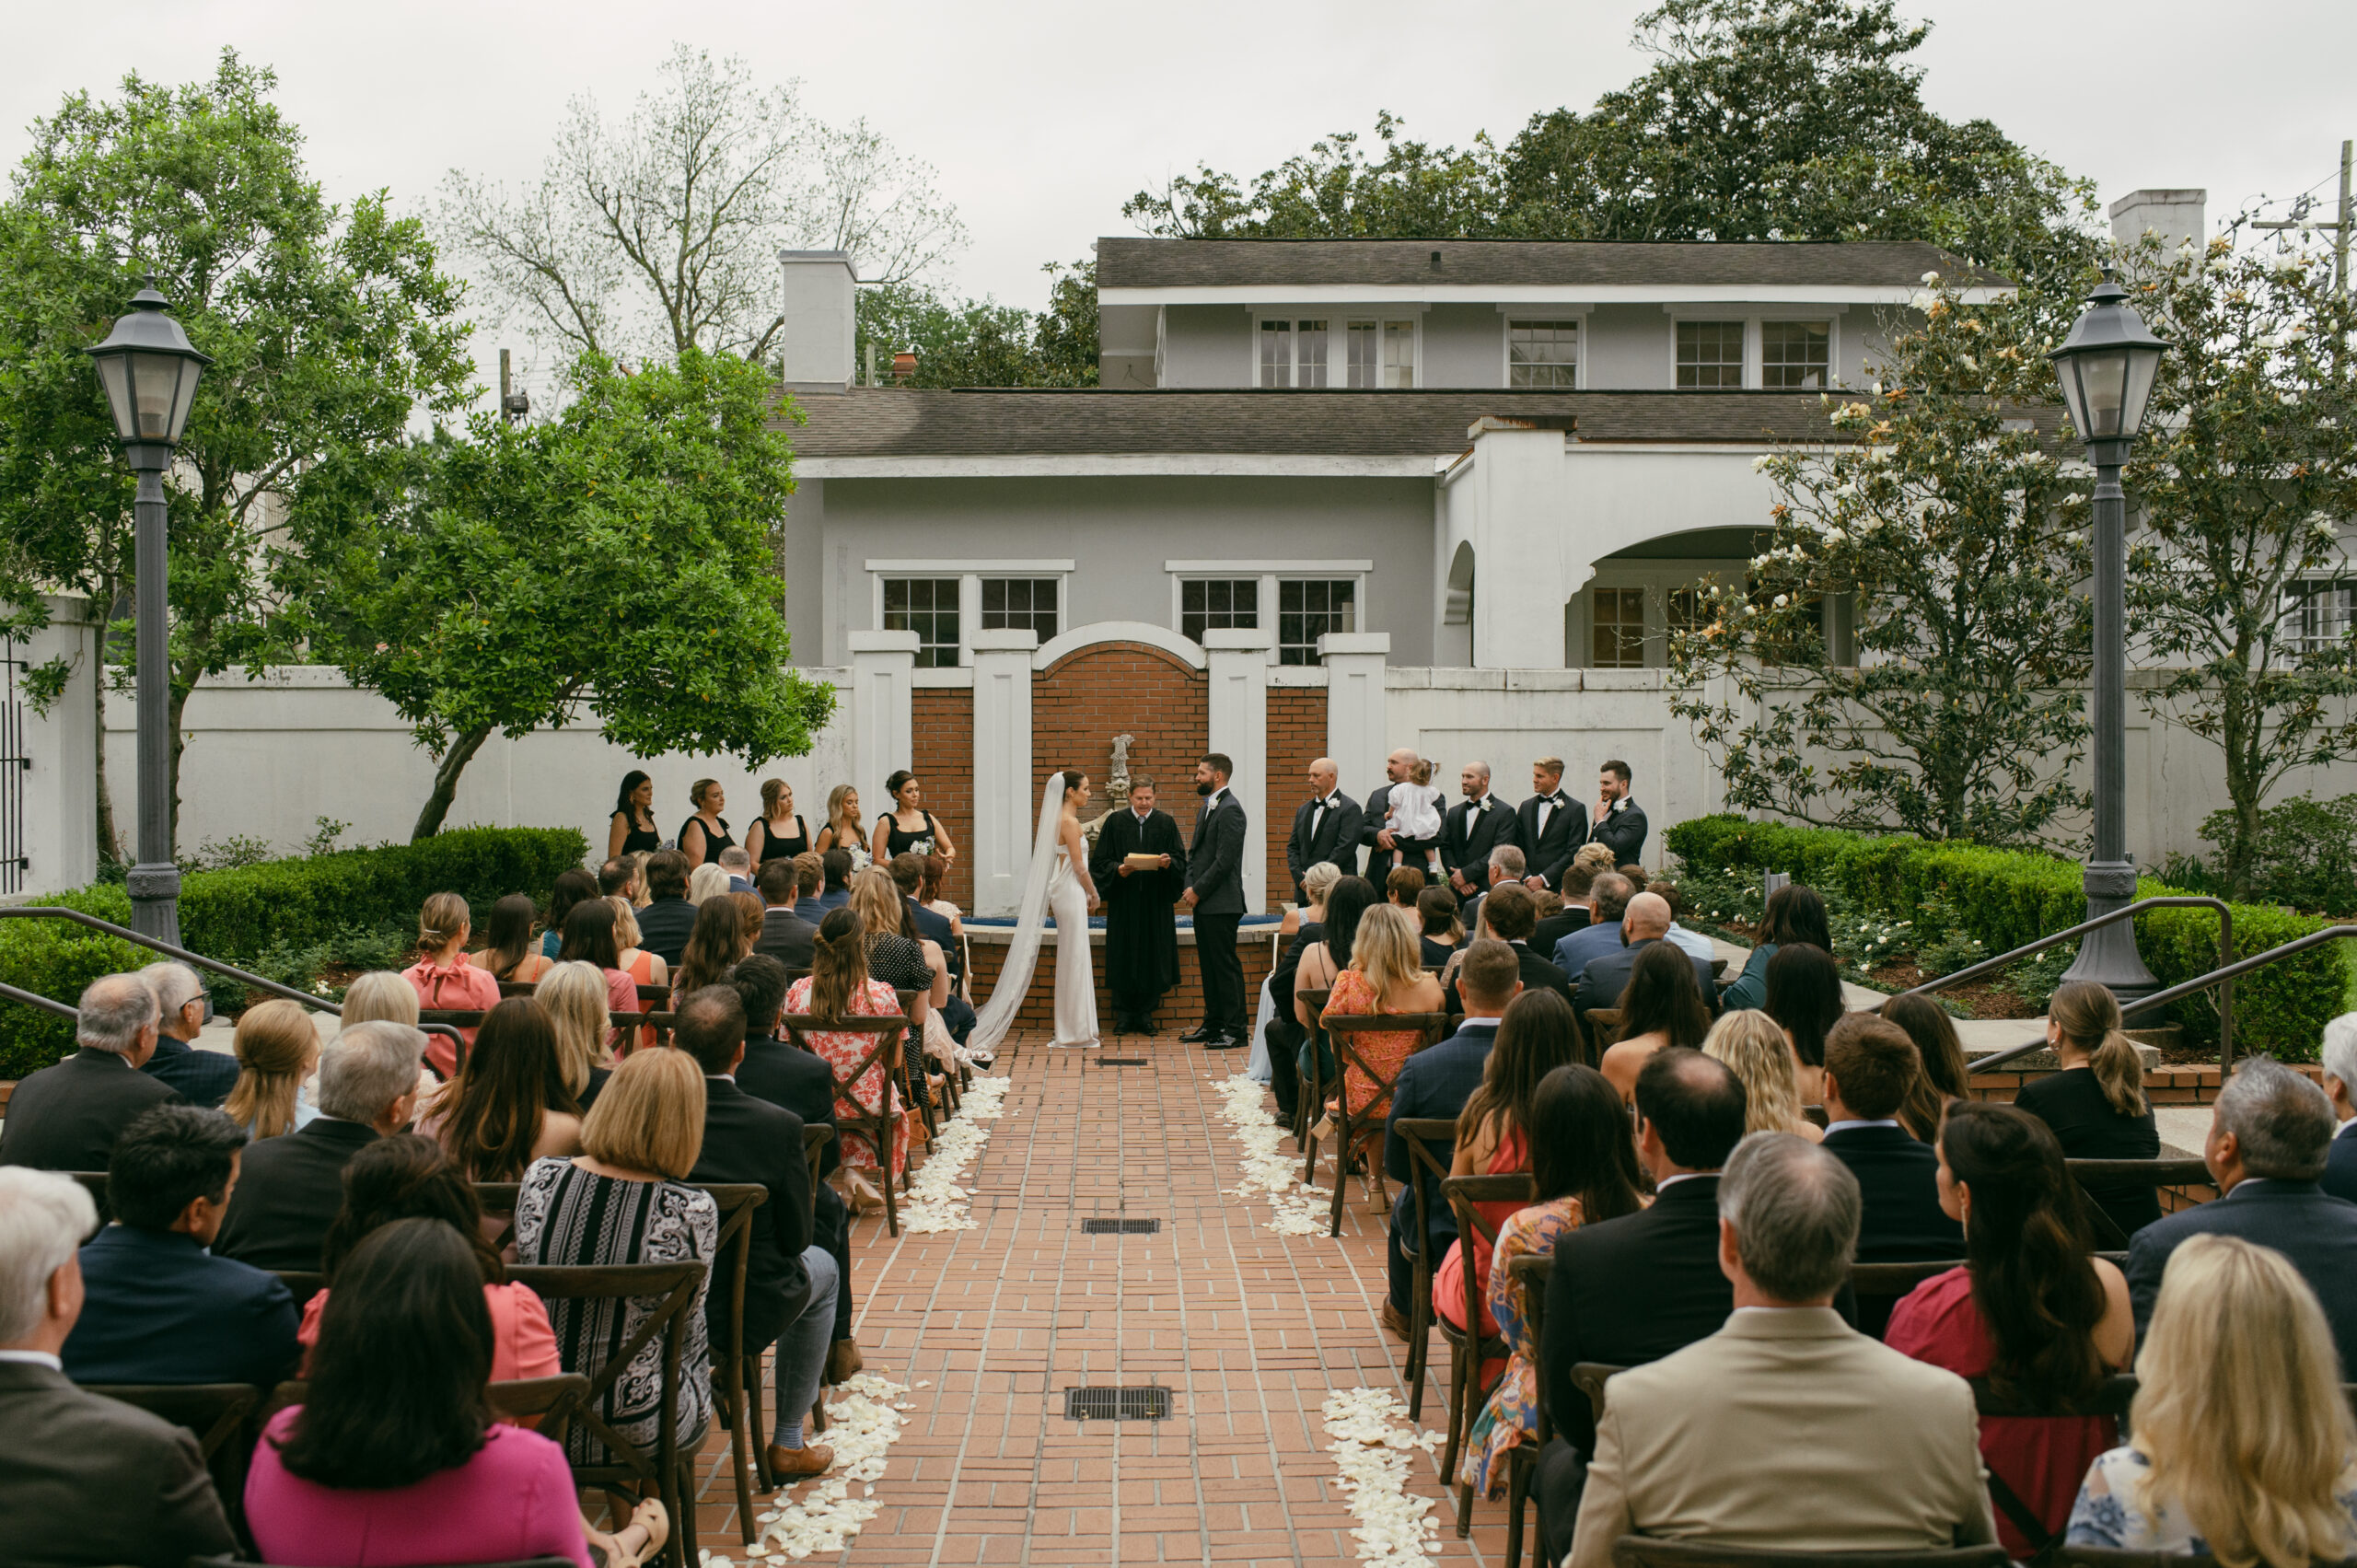 A courtyard wedding ceremony at the Old Governor's Mansion in baton rouge, Louisiana.